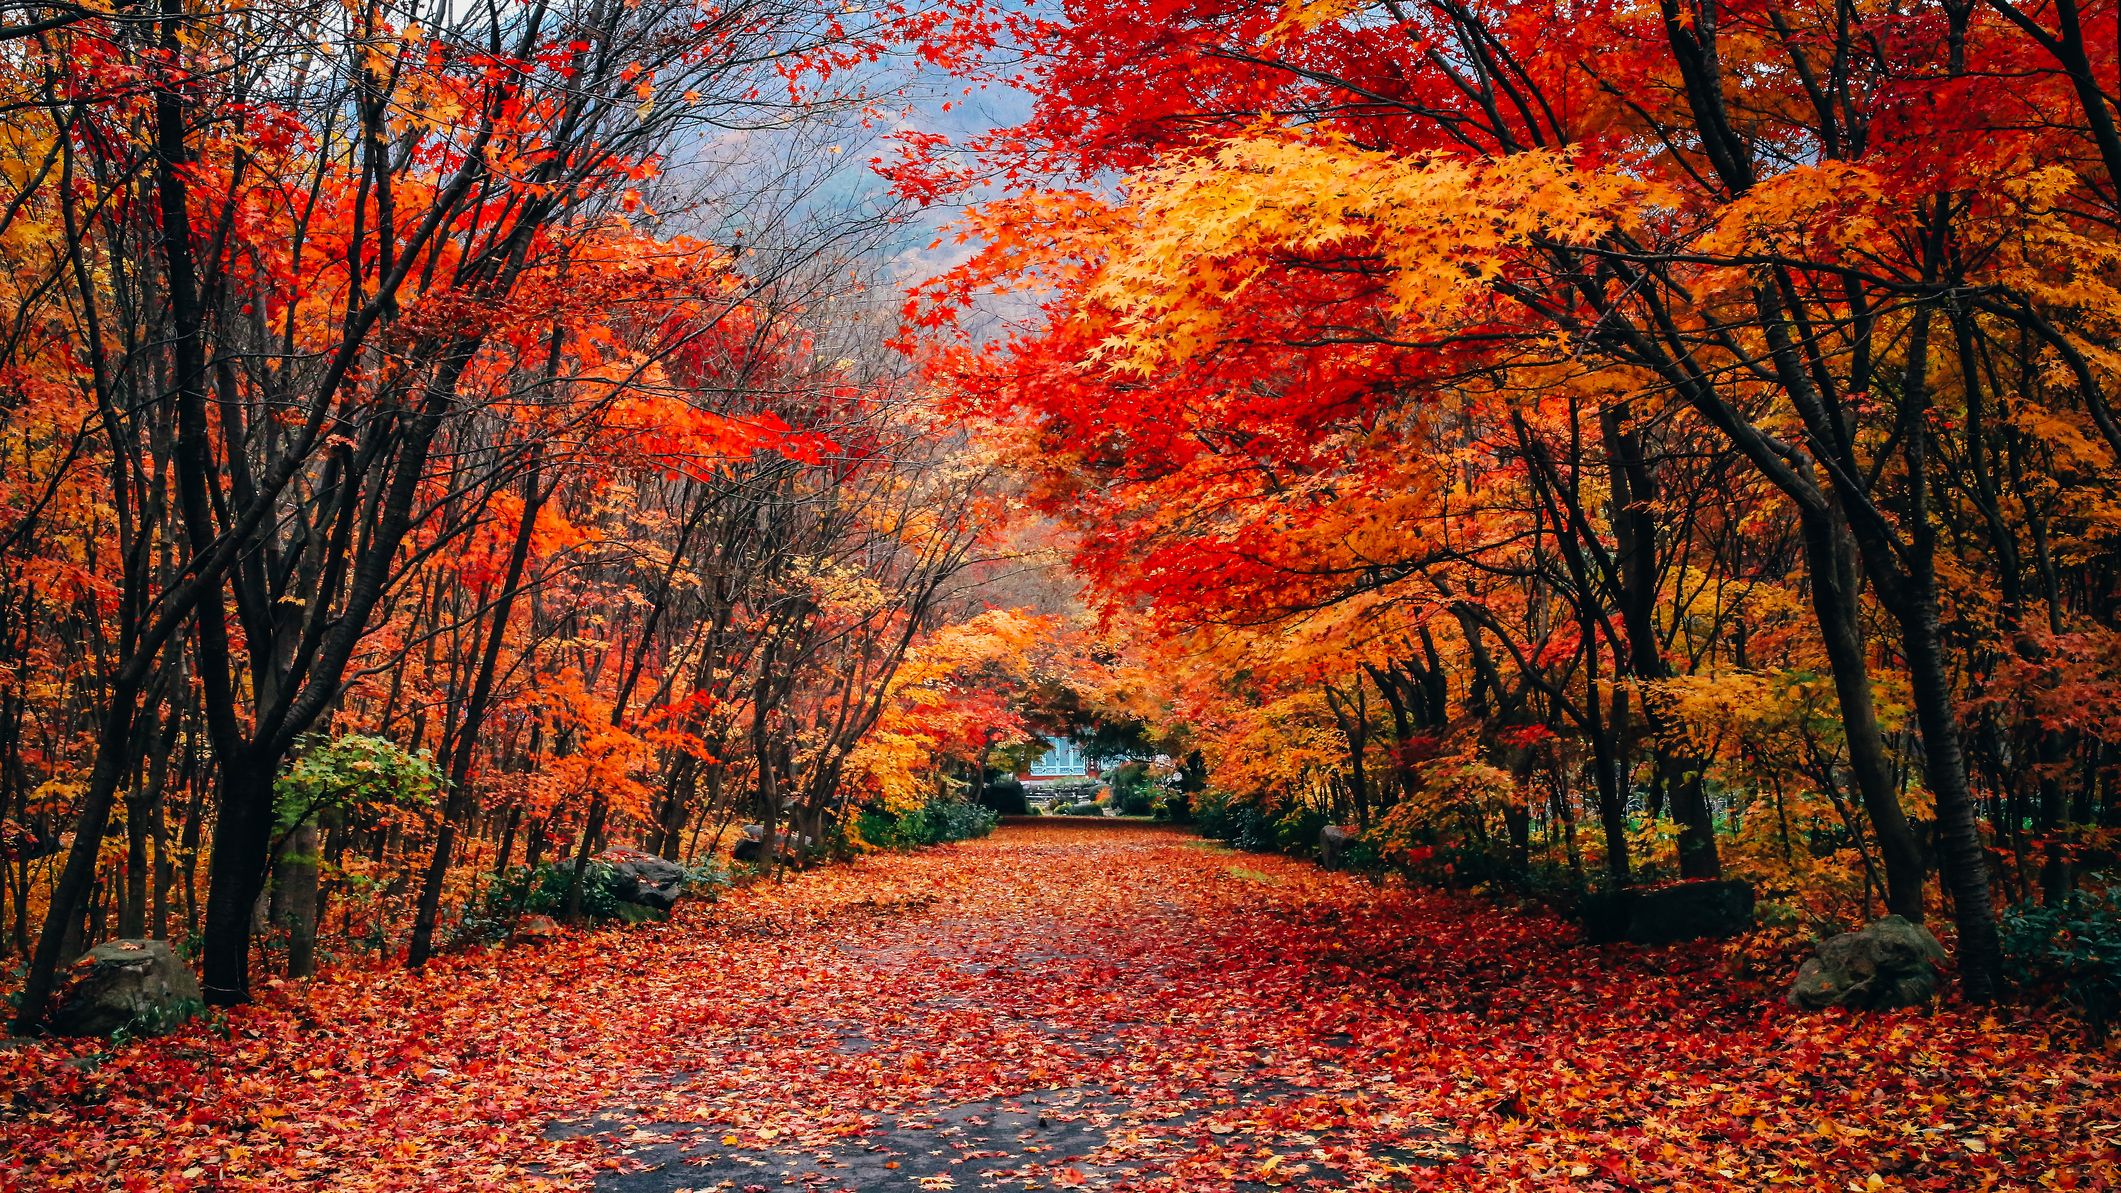 Why Do Leaves Change Color in the Fall? Autumn Foliage, Explained